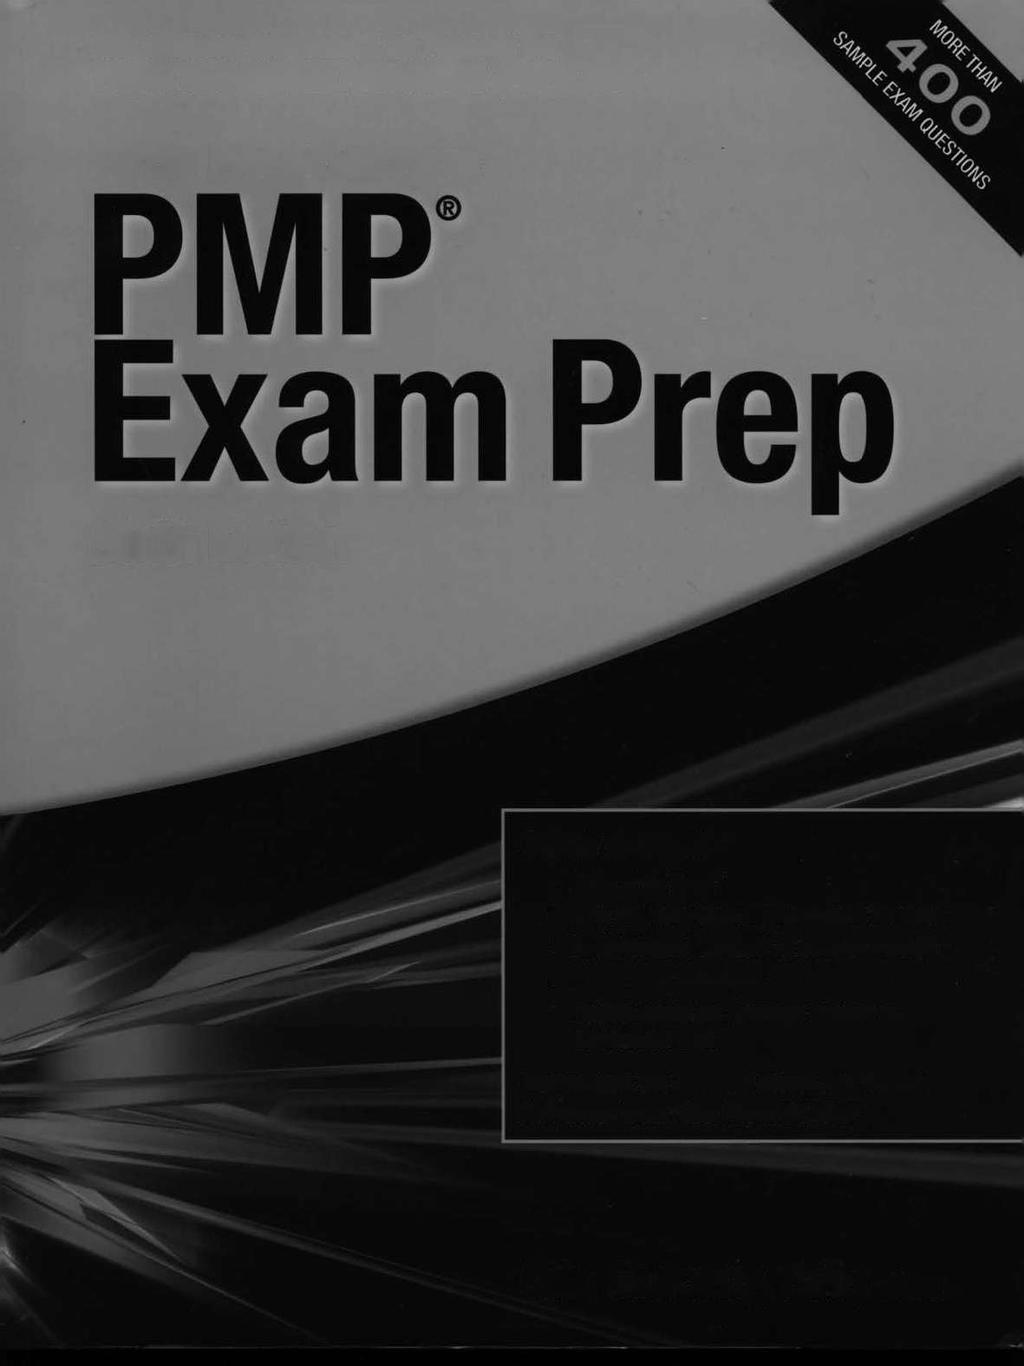 Rita s Course in a Book for Passing the Project Management Professional (PMP) Exam Rita Mulcahy s Ninth Edition Inside this book: Tricks of the Trade What you really need to know to pass the exam